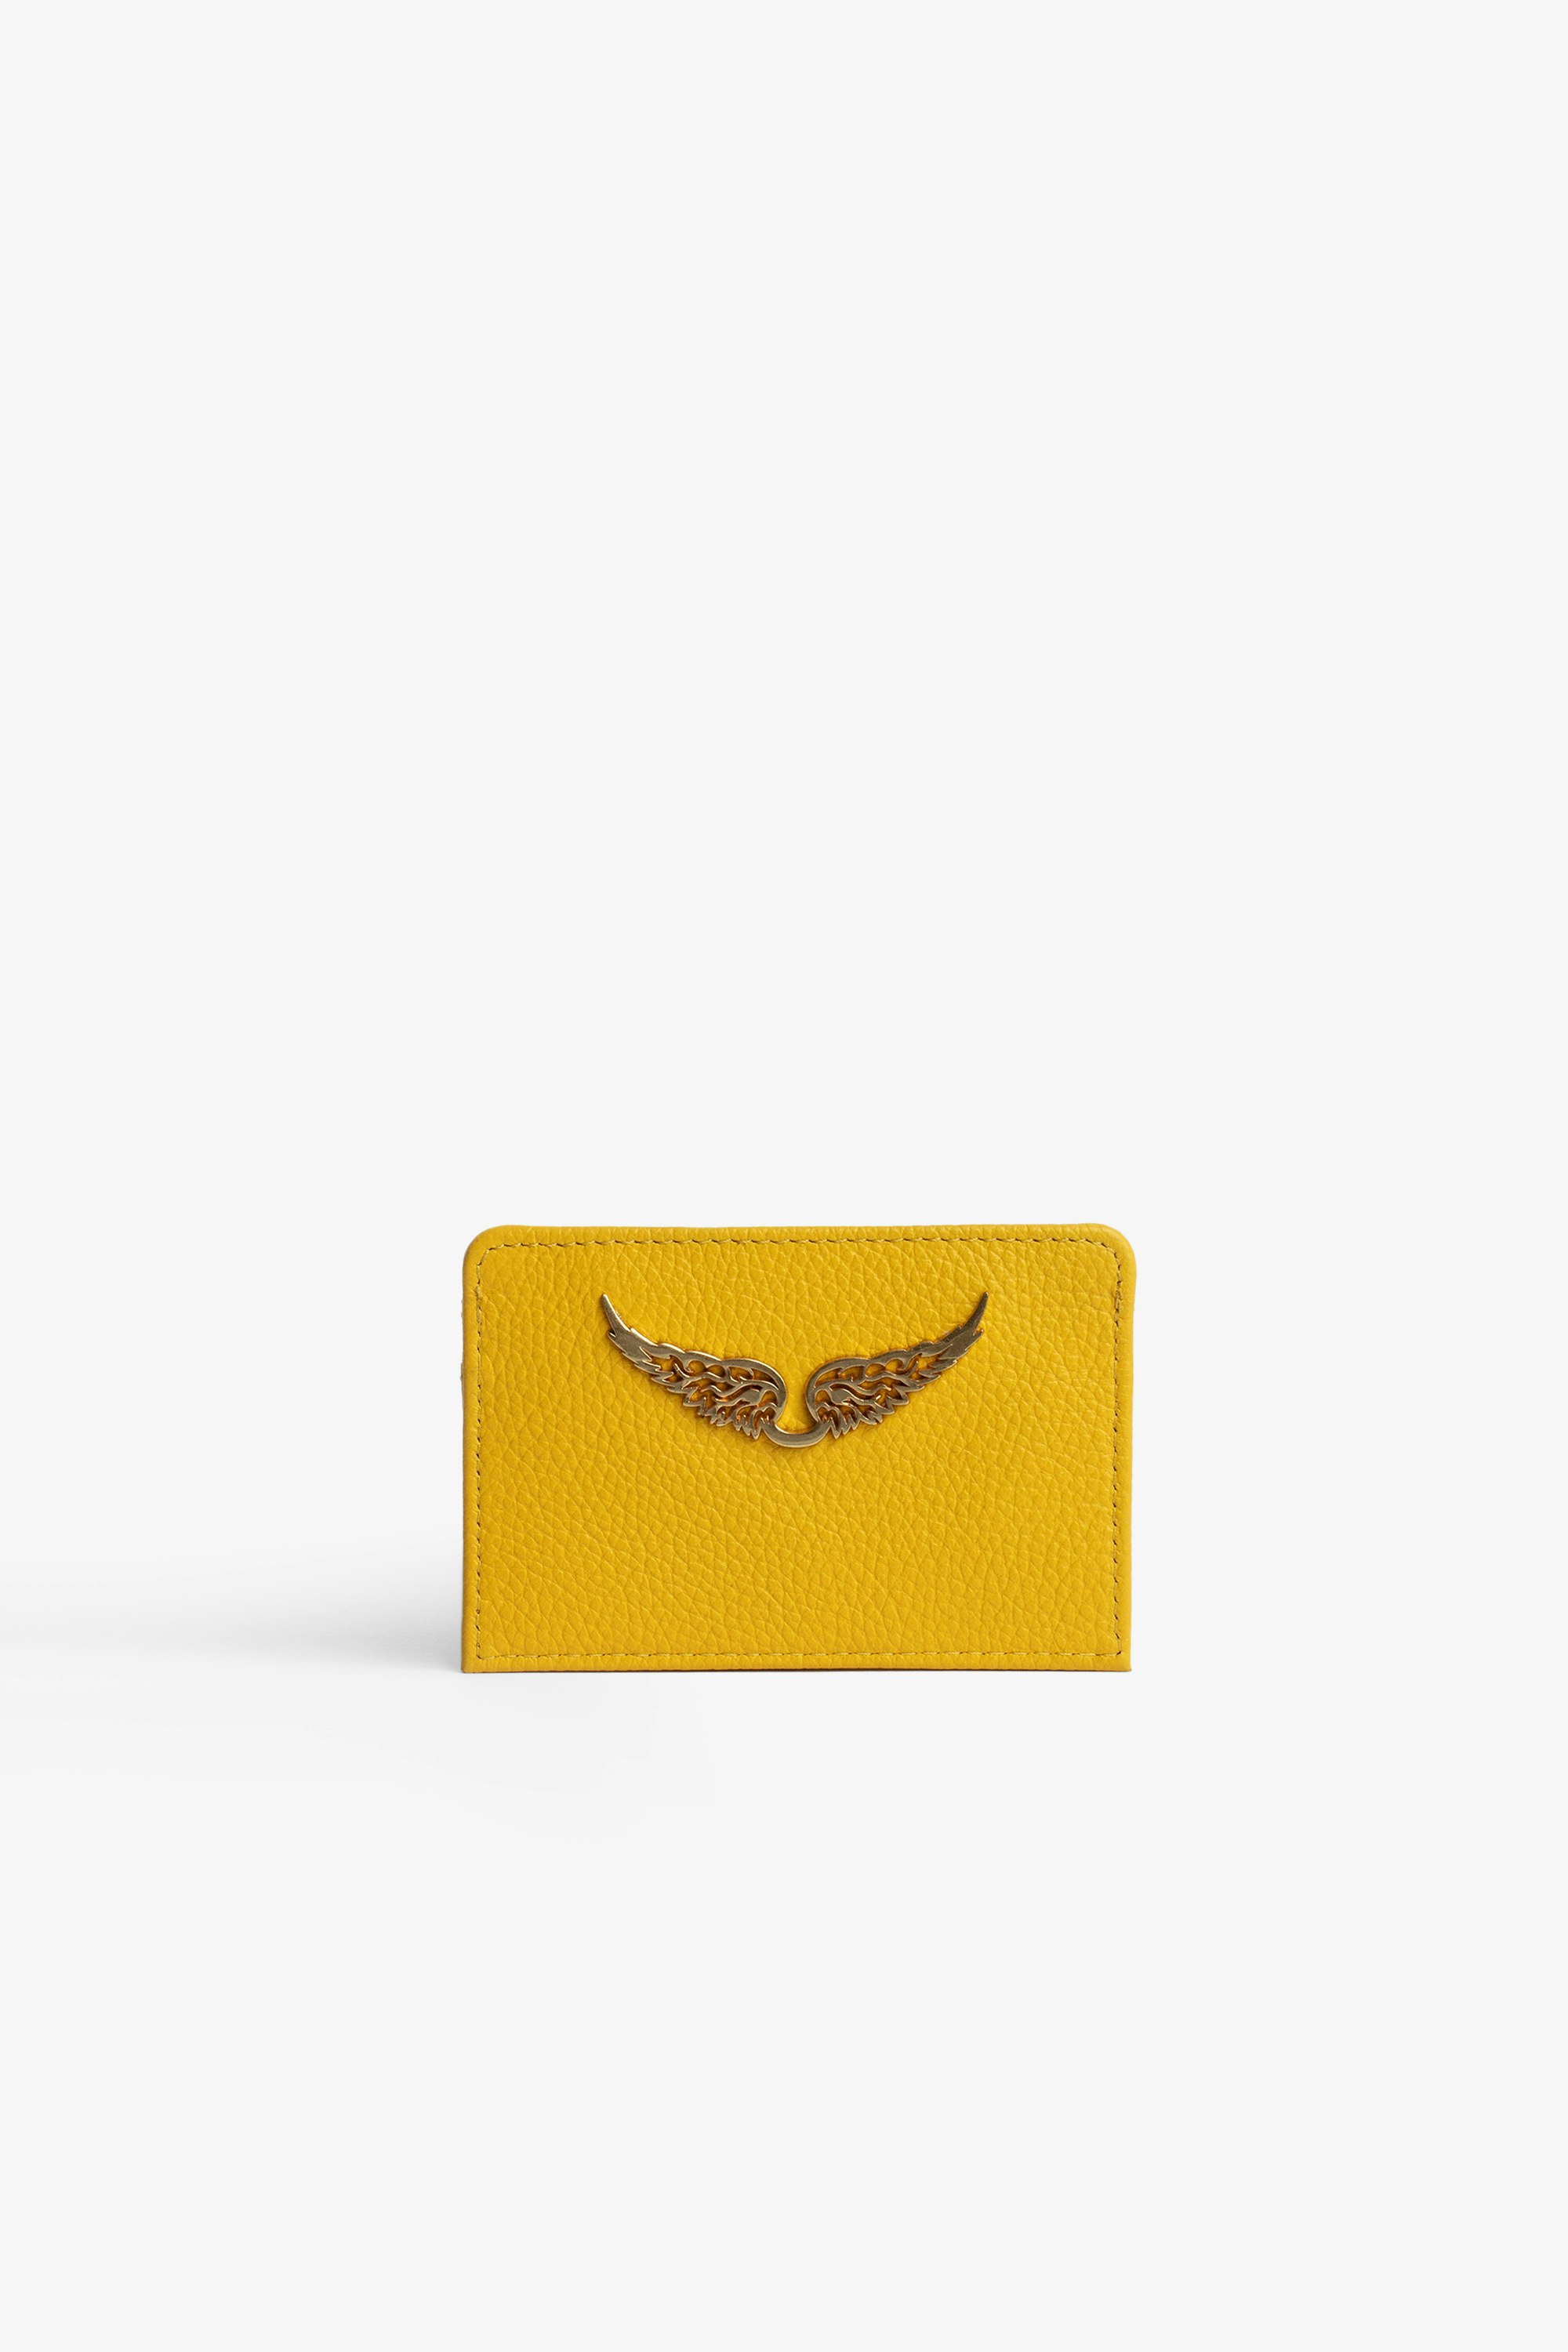 ZV Pass Card Holder Women’s card holder in yellow grained leather